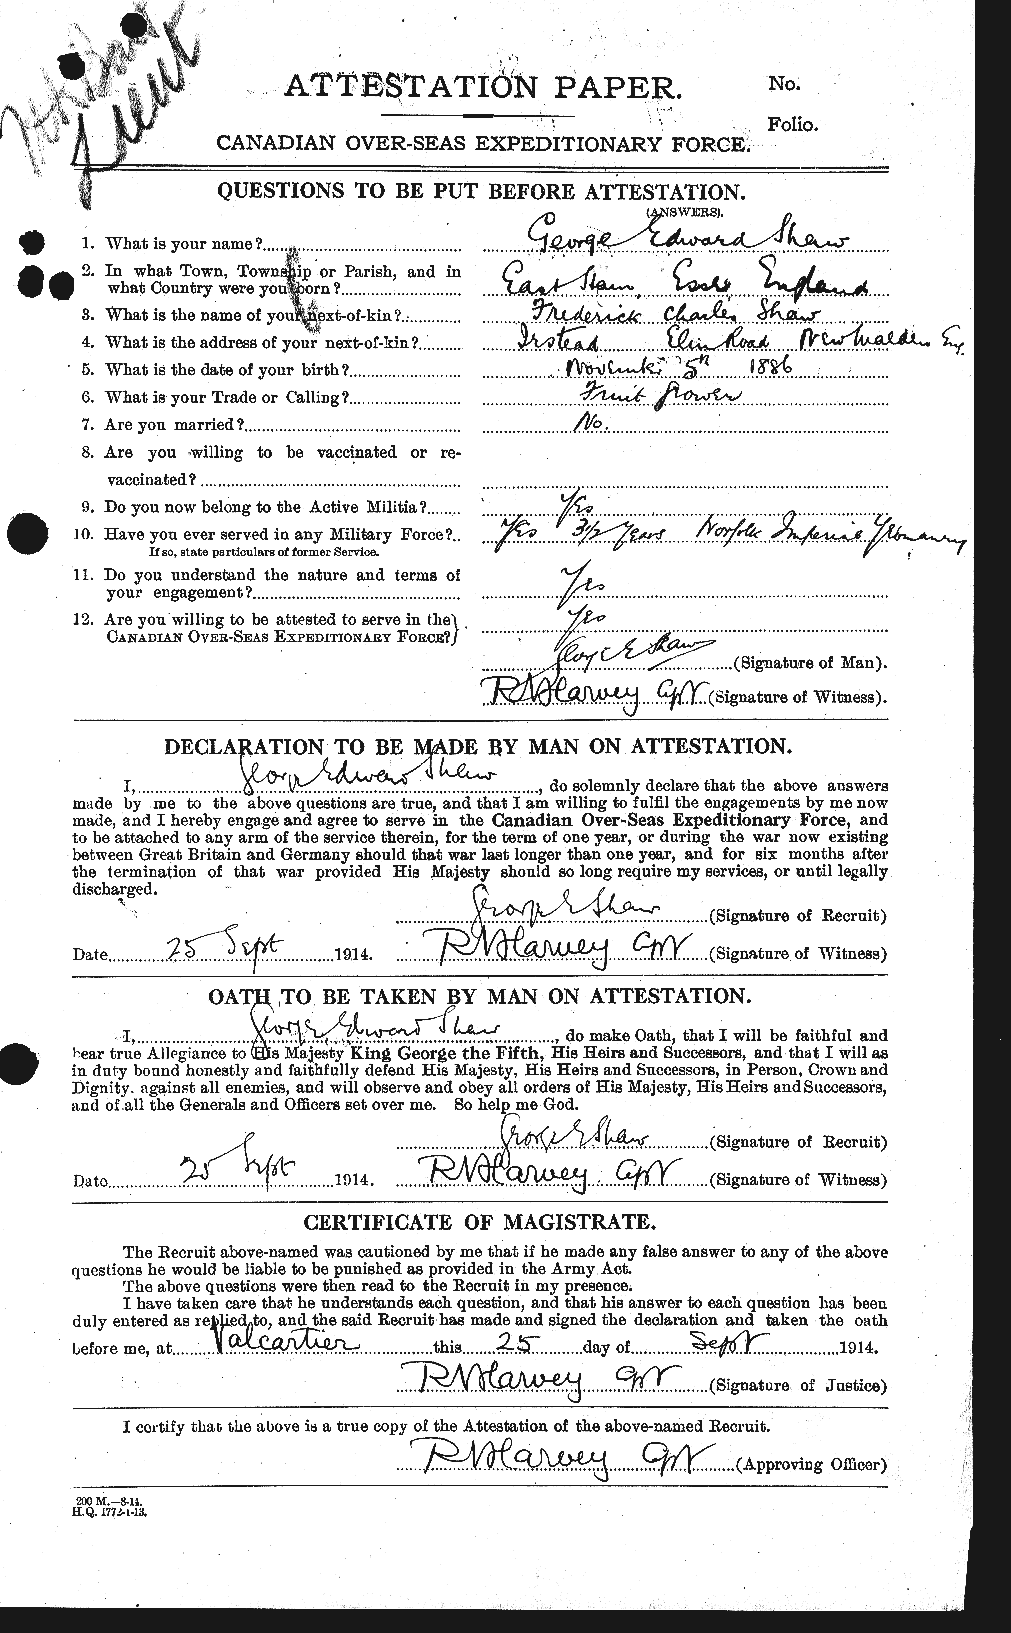 Personnel Records of the First World War - CEF 091796a